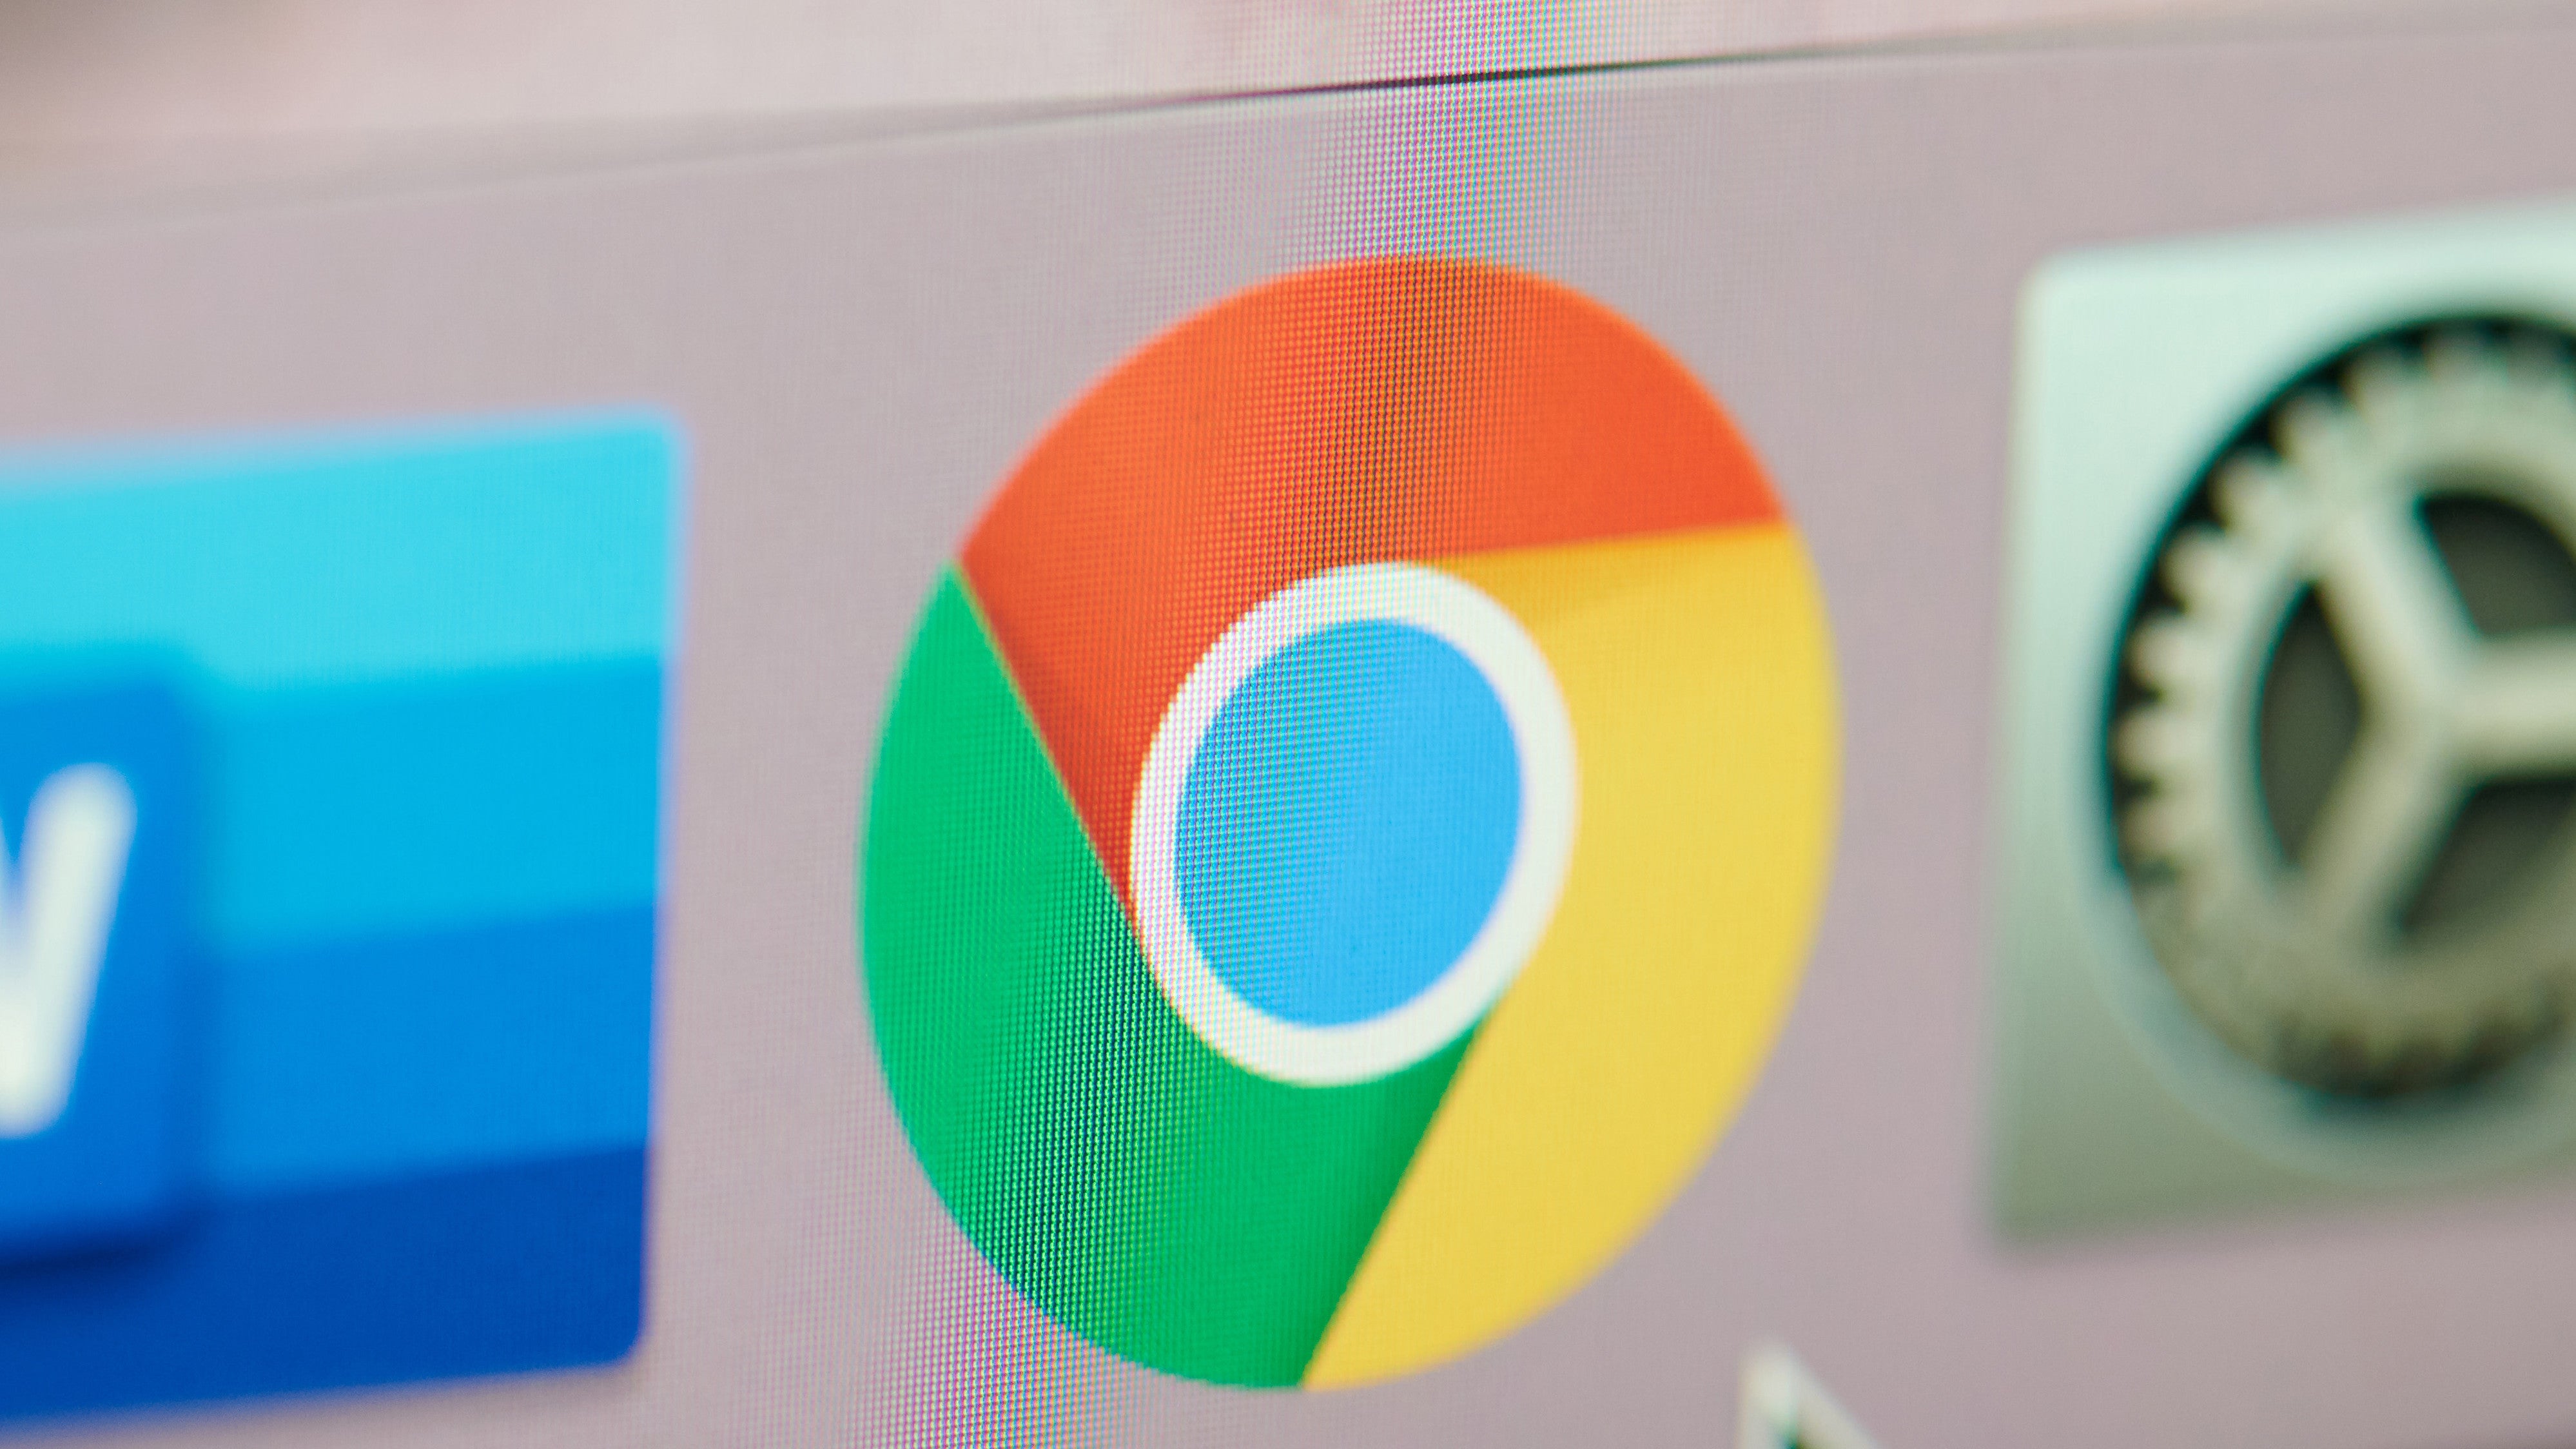 Automatically Organise Your Downloads With This Chrome Extension